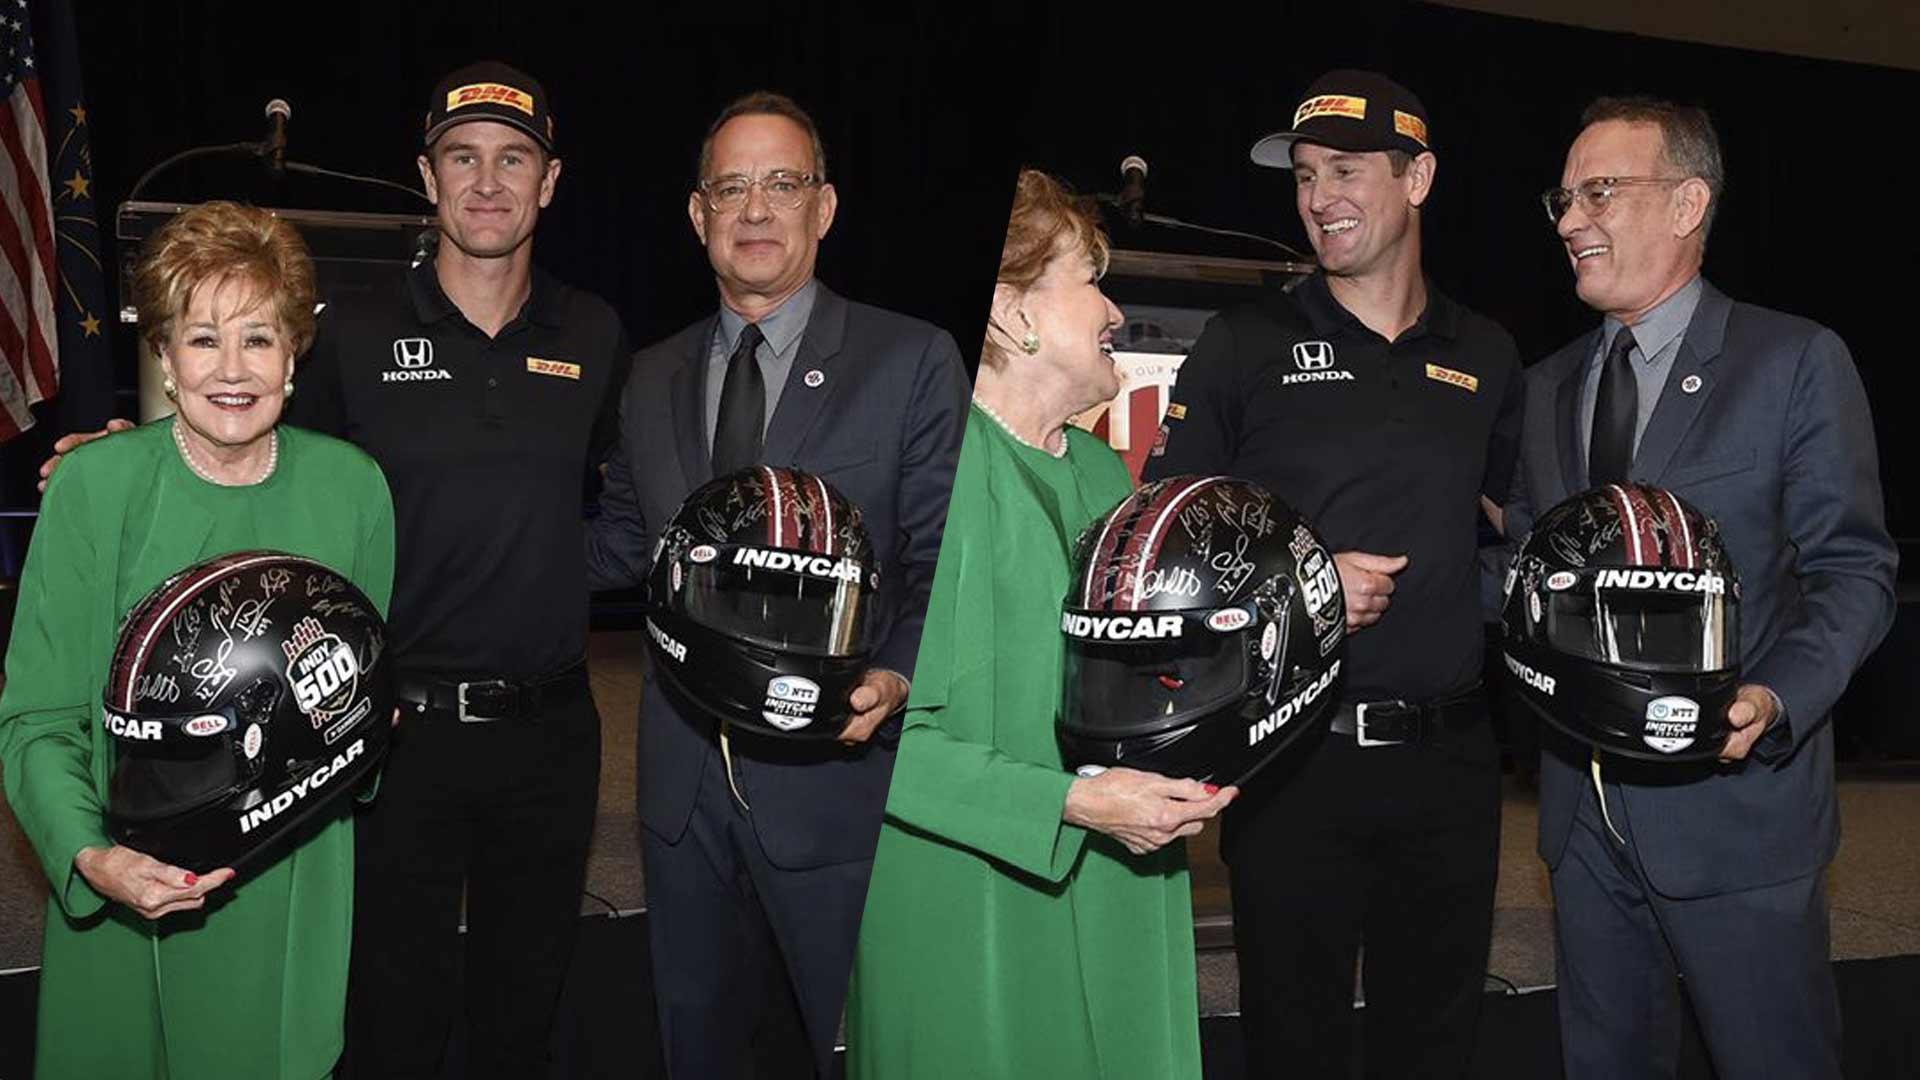 Tom Hanks Receives Signed Helmet From IndyCar Champ for Military Charity Work